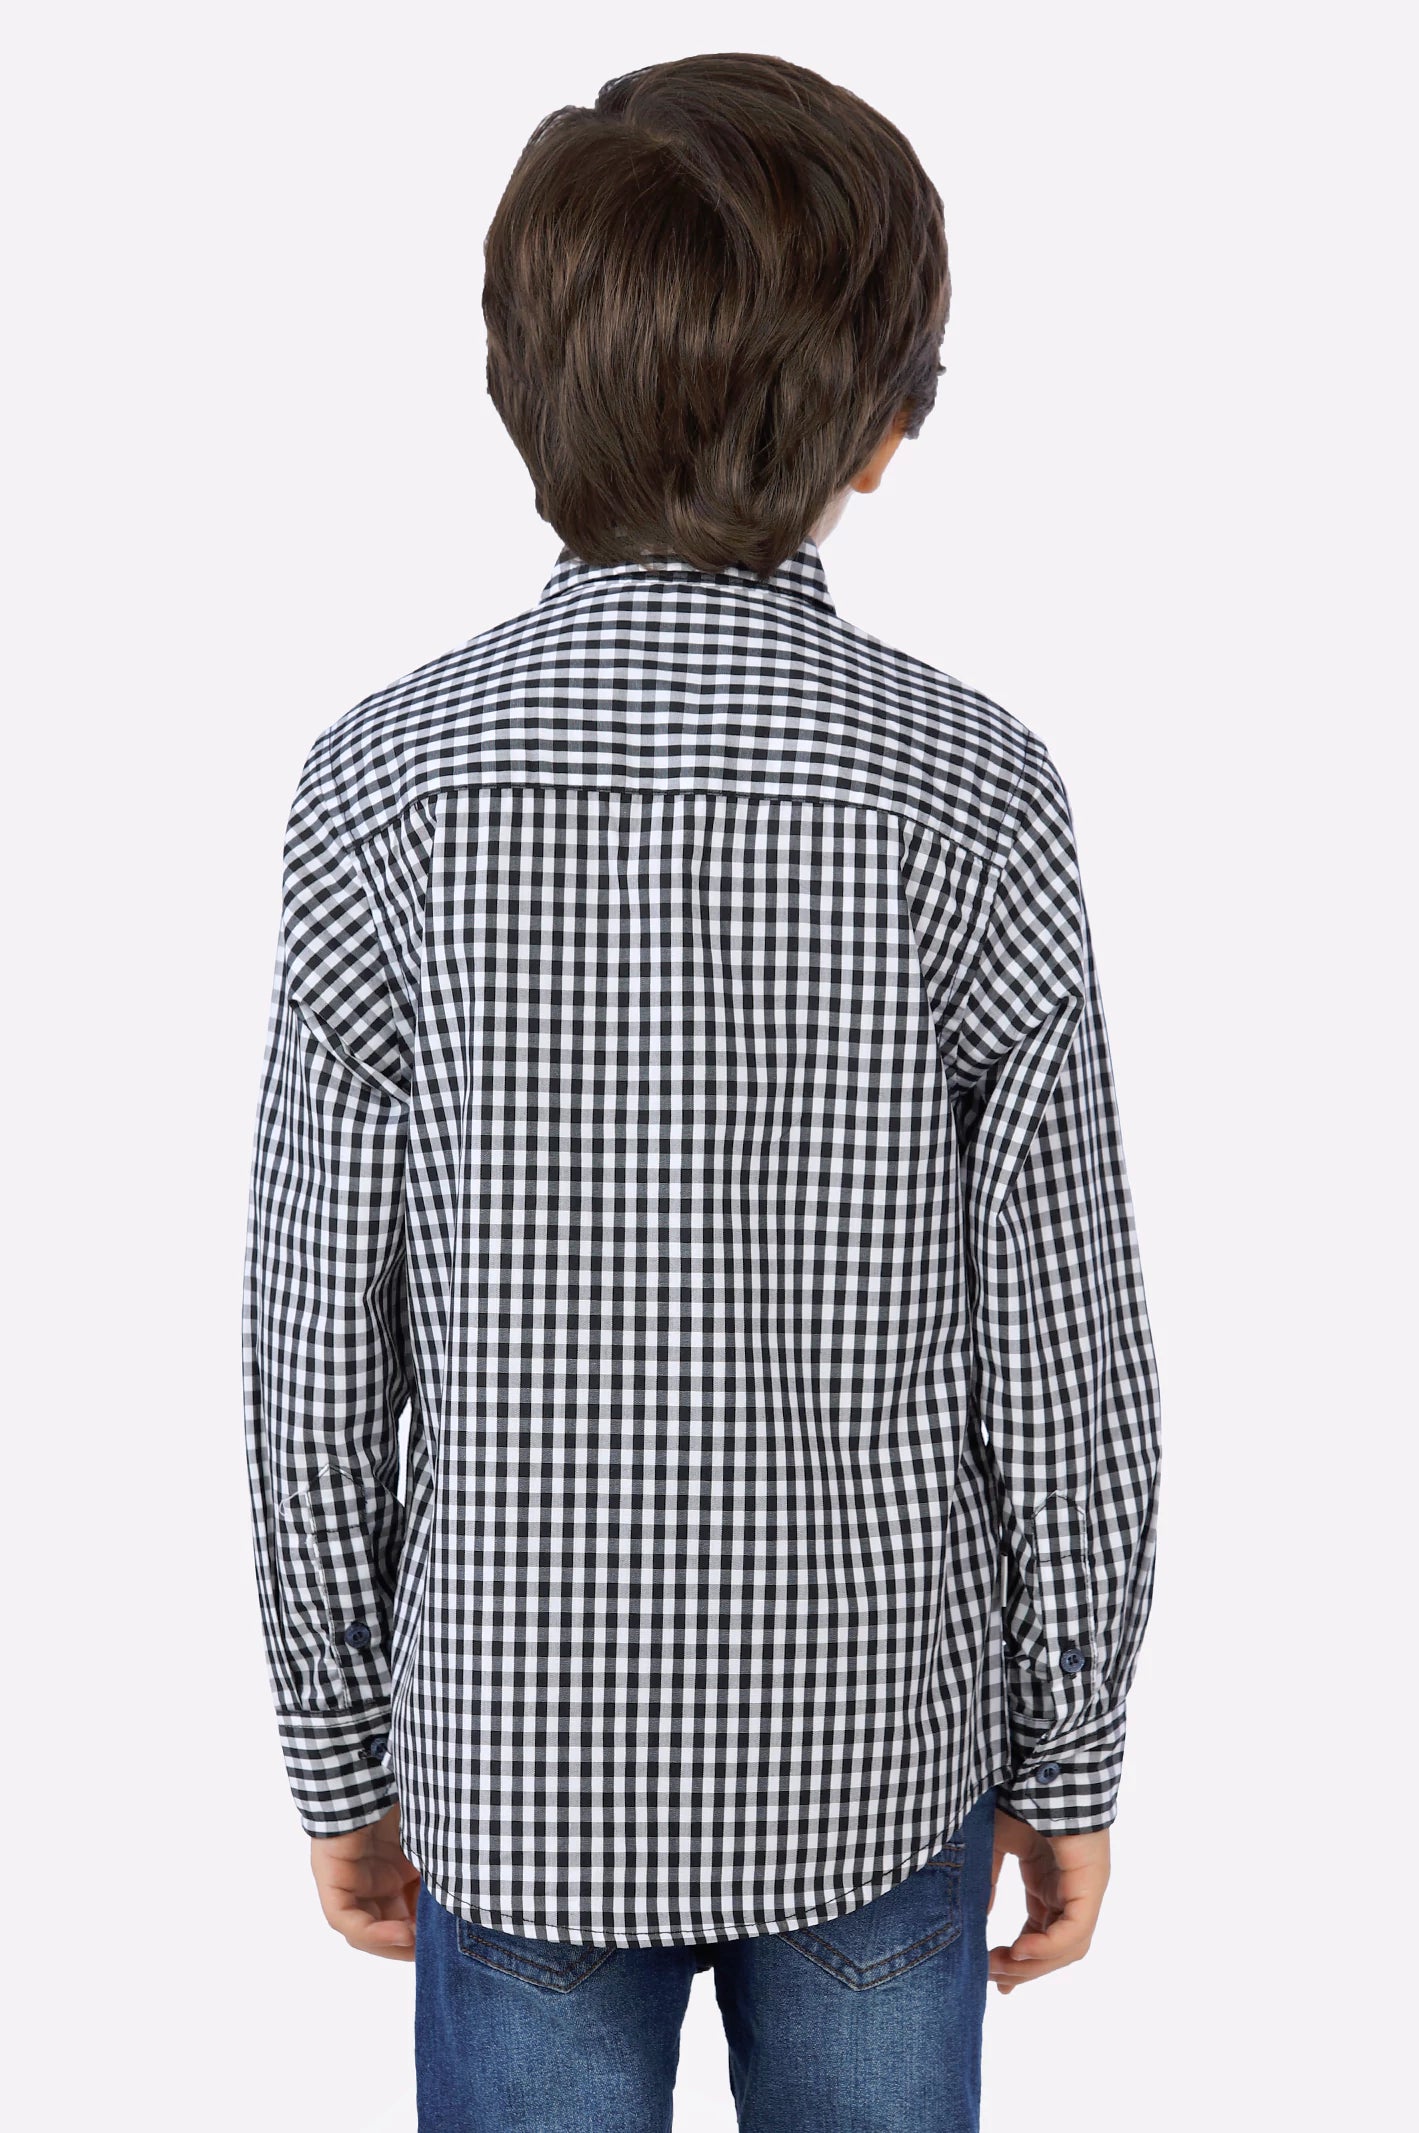 Black Gingham Check Boys Shirt From Diners